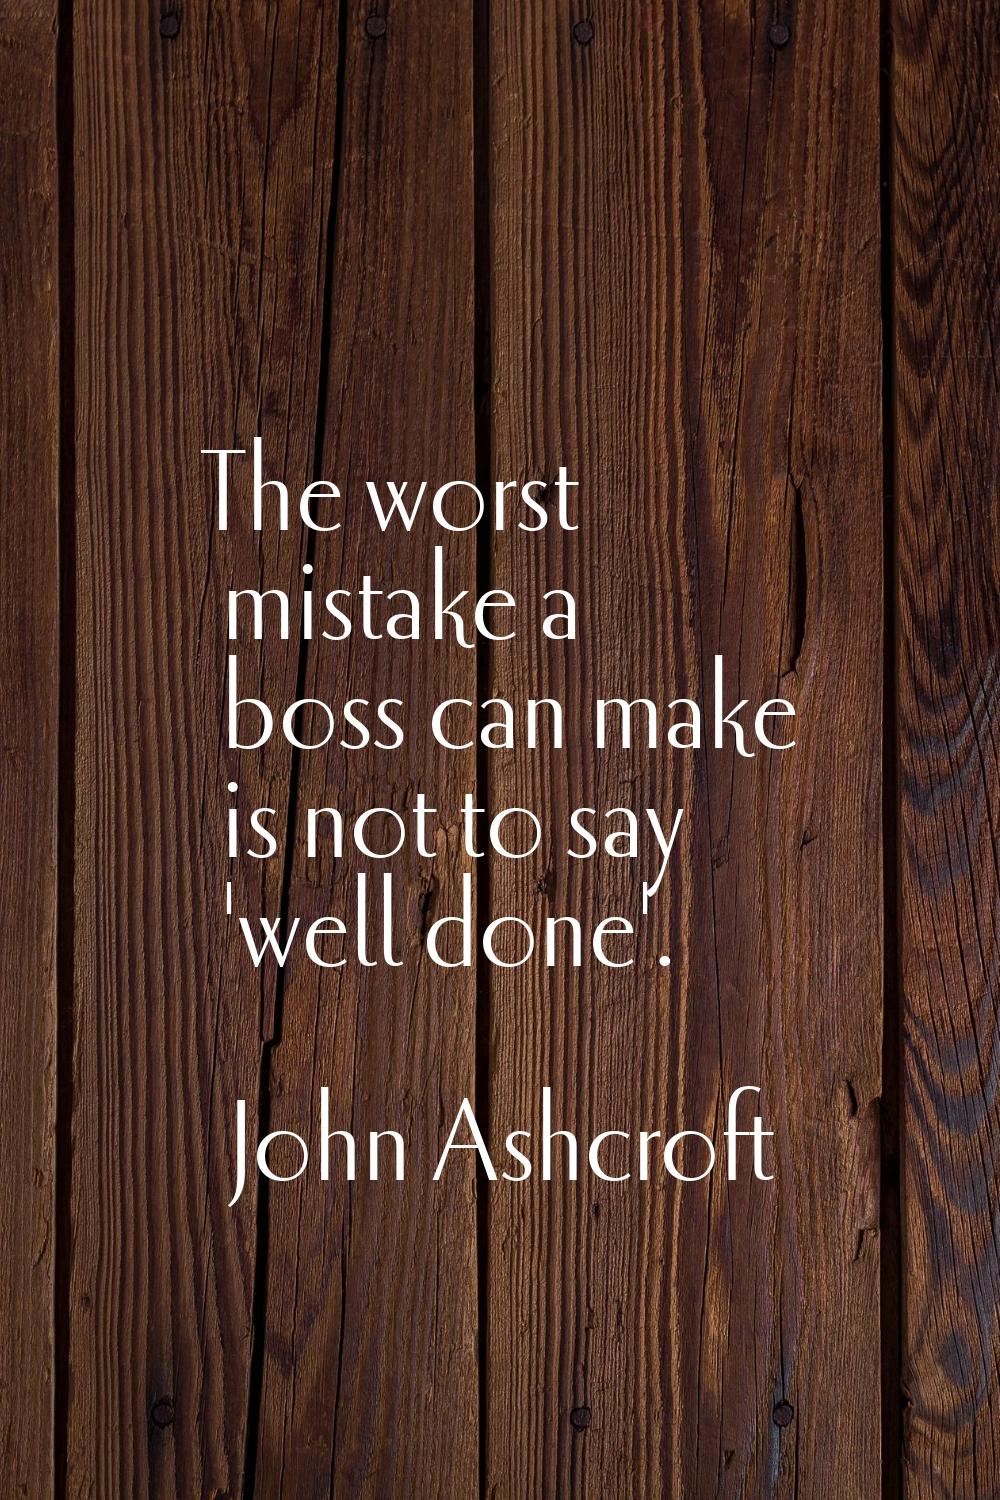 The worst mistake a boss can make is not to say 'well done'.